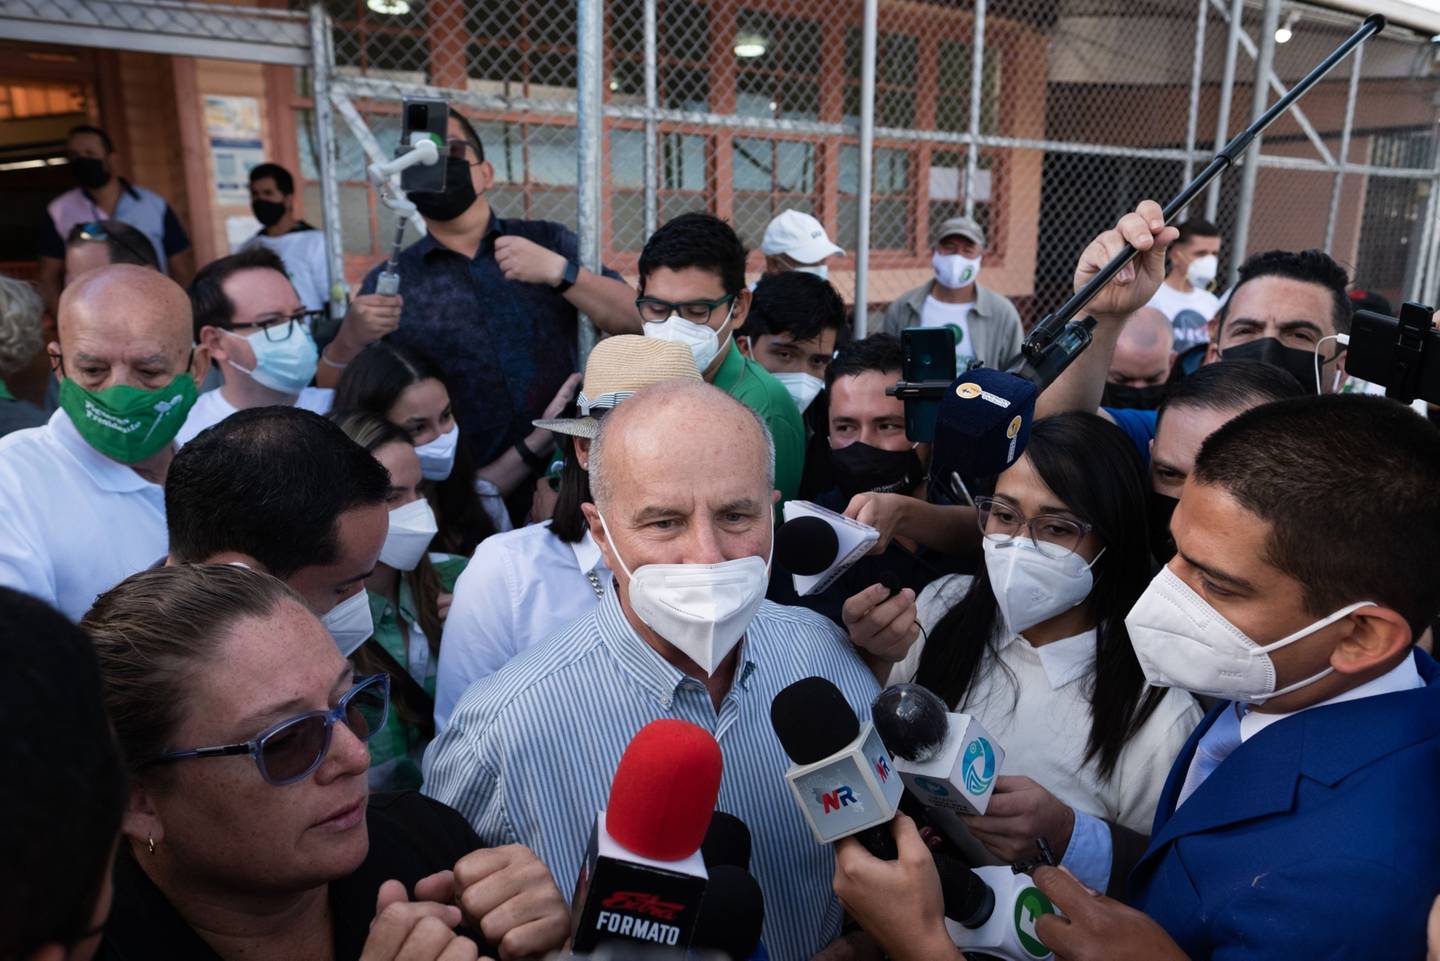 Jose Maria Figueres, presidential candidate of the National Liberation Party, center, speaks to members of the media after casting a ballot at a polling station during presidential elections in San Jose, Costa Rica.